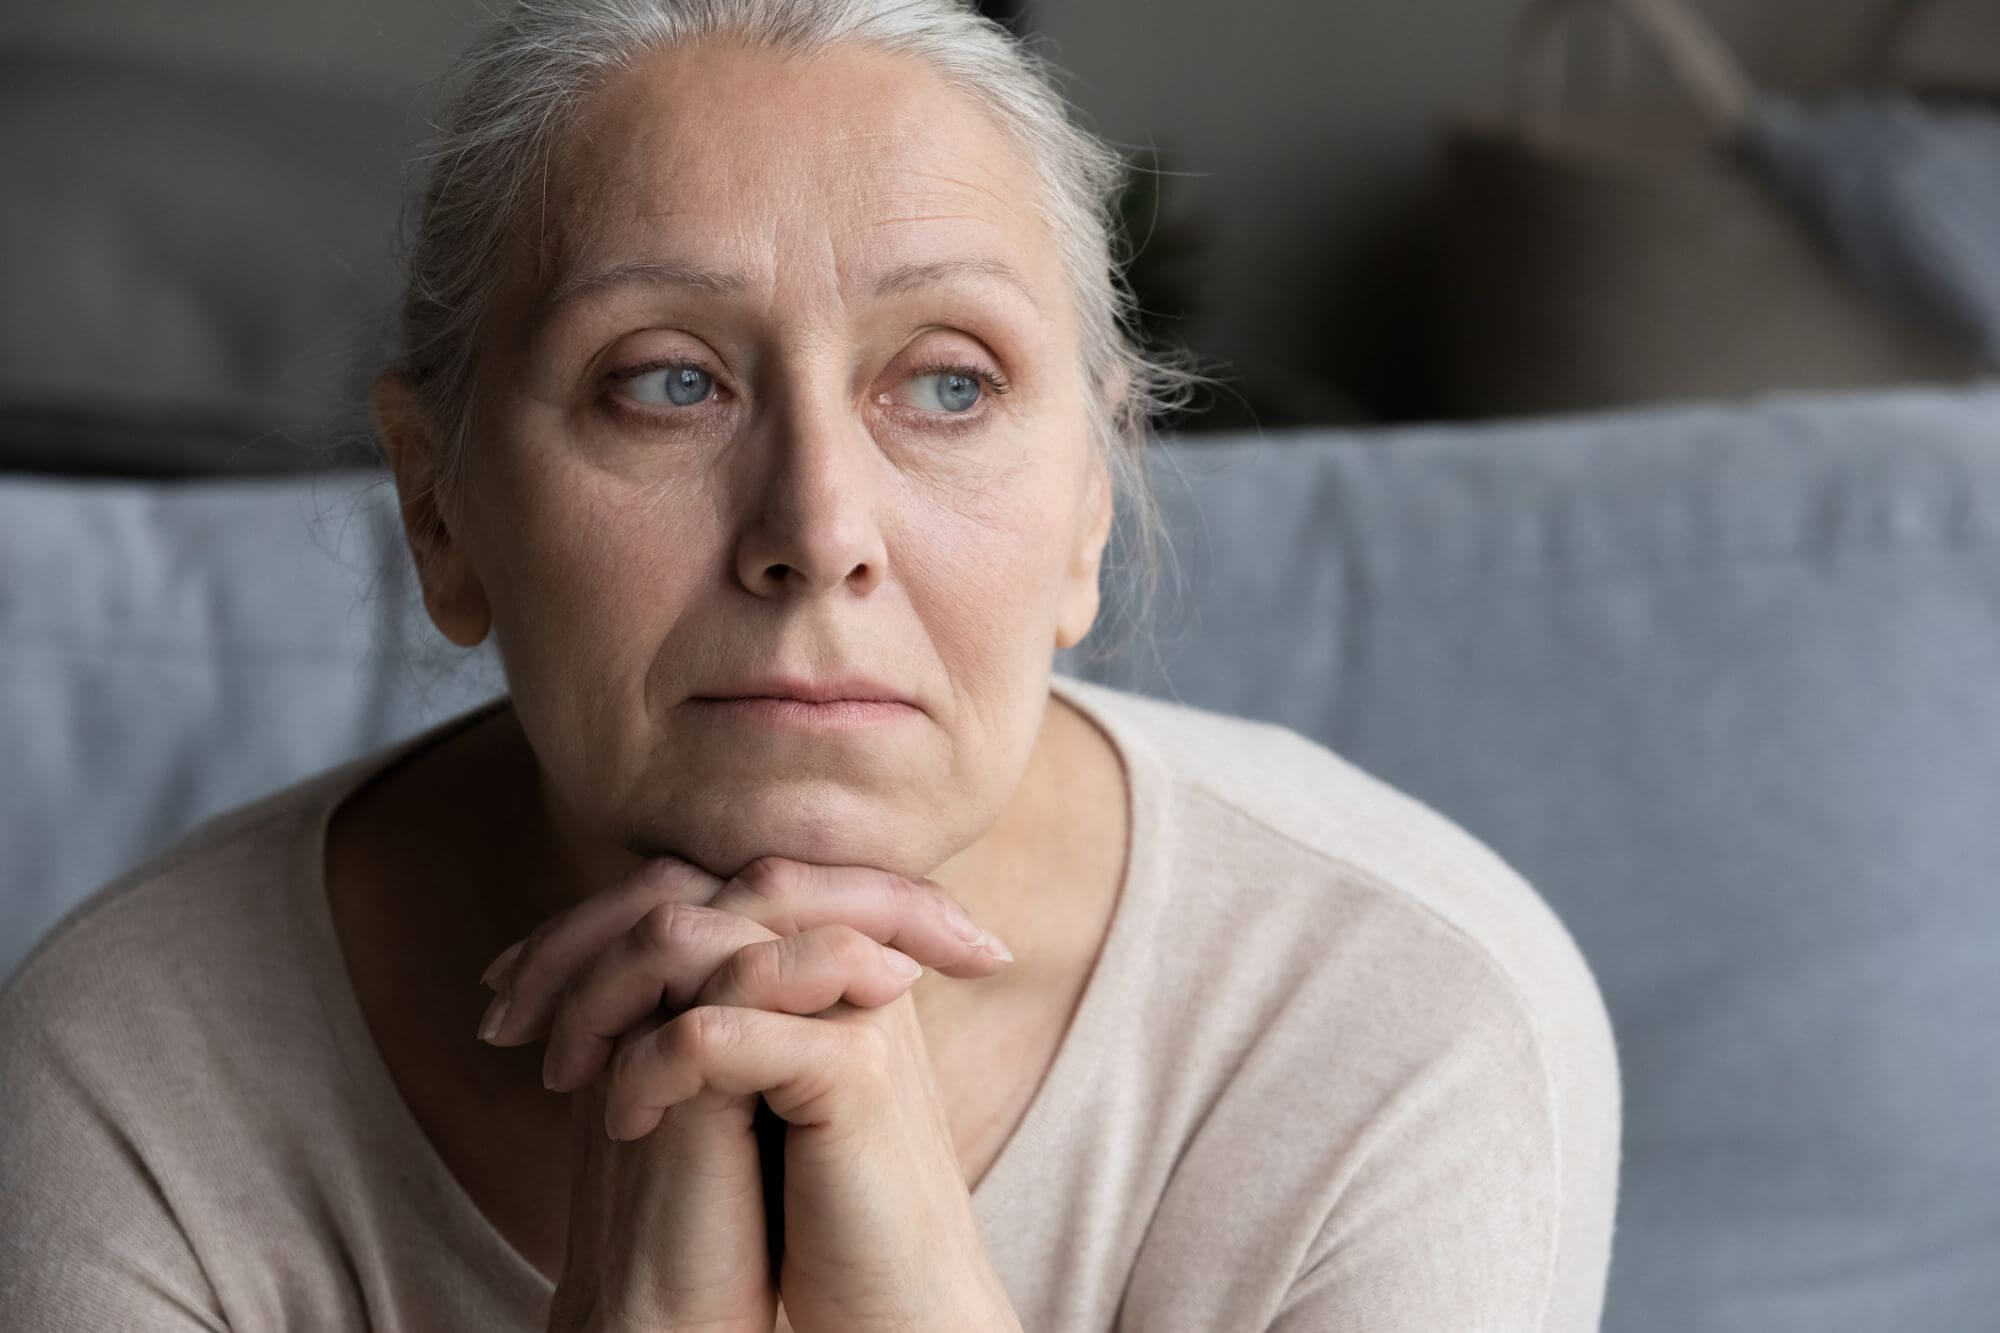 Older woman with depression who needs treatment